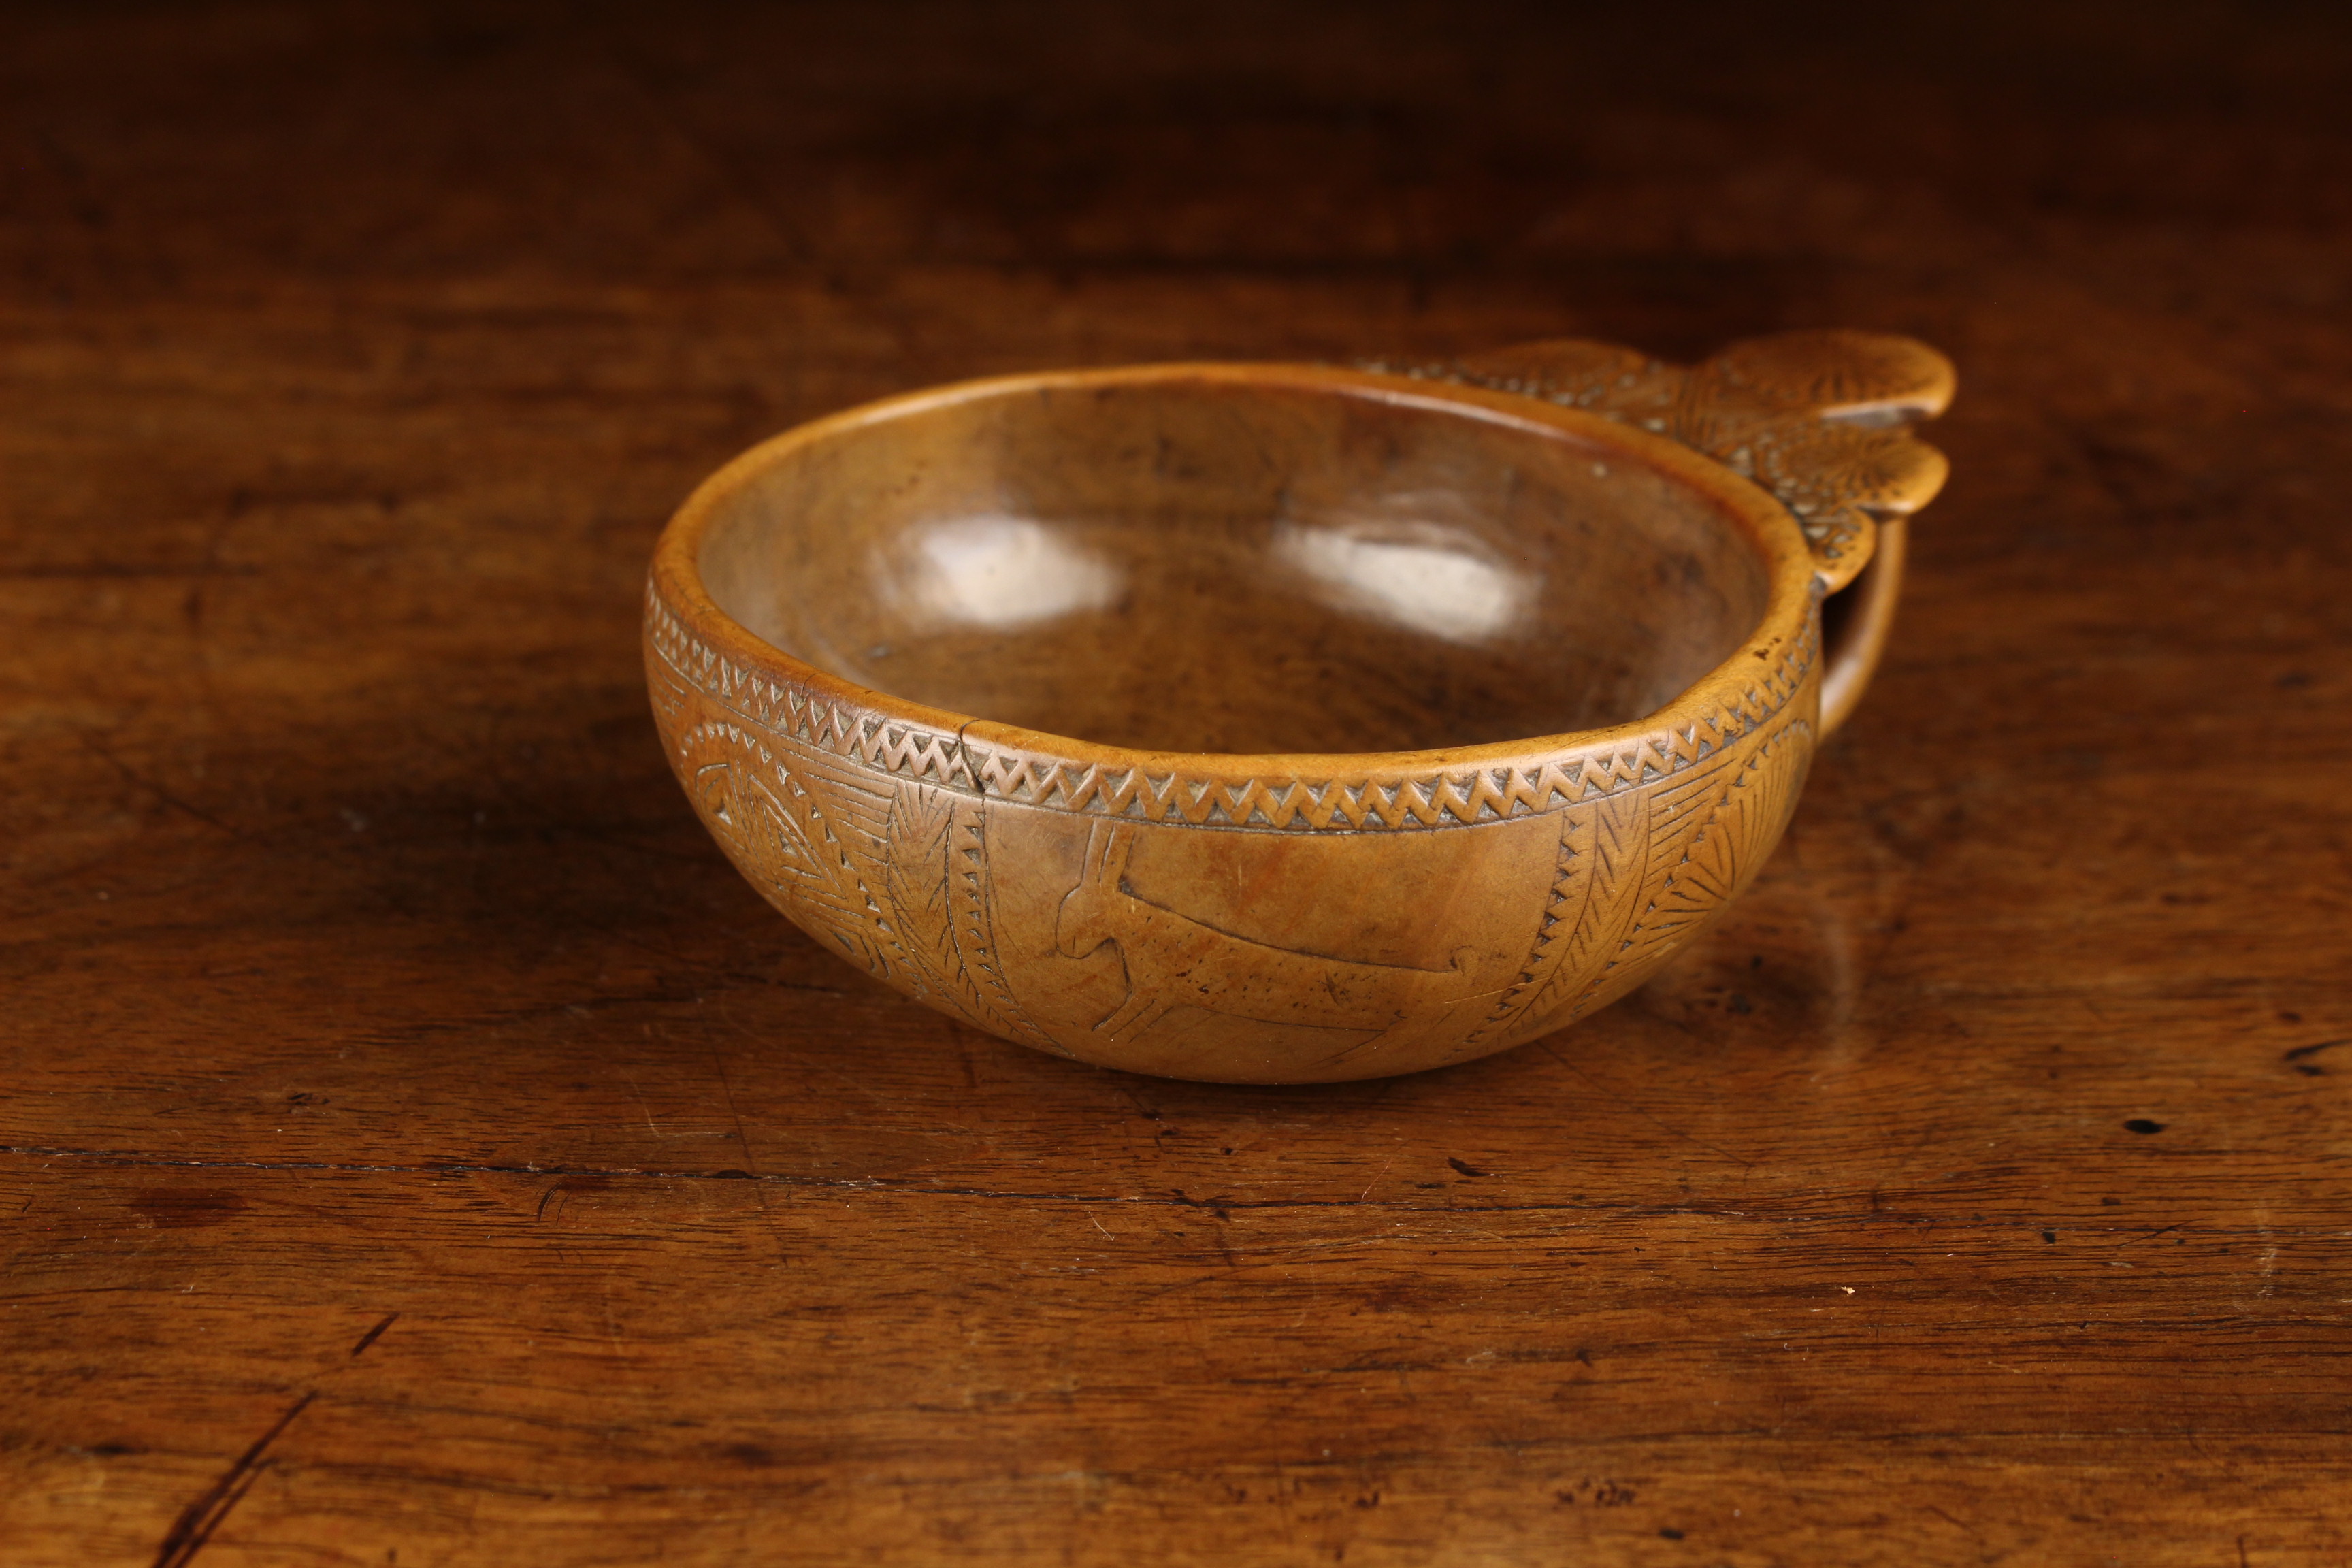 A Fine & Rare 16th/17th Century Boxwood Porringer or Tasting Cup of rich colour and patination. - Image 5 of 10